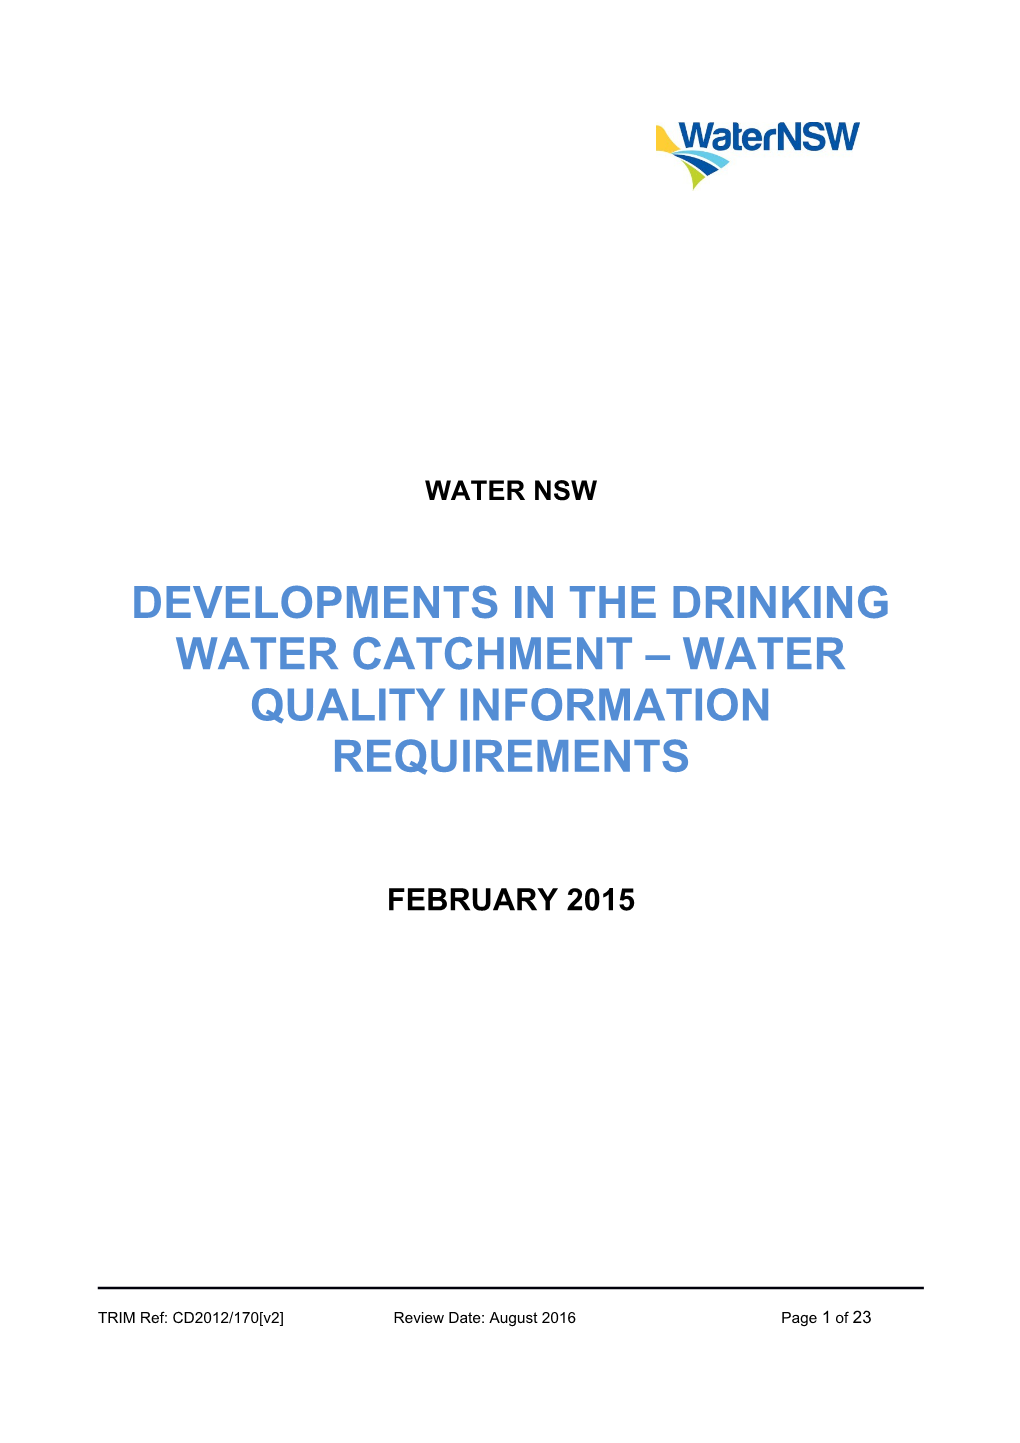 Developments in the Drinking Water Catchment Water Quality Information Requirements